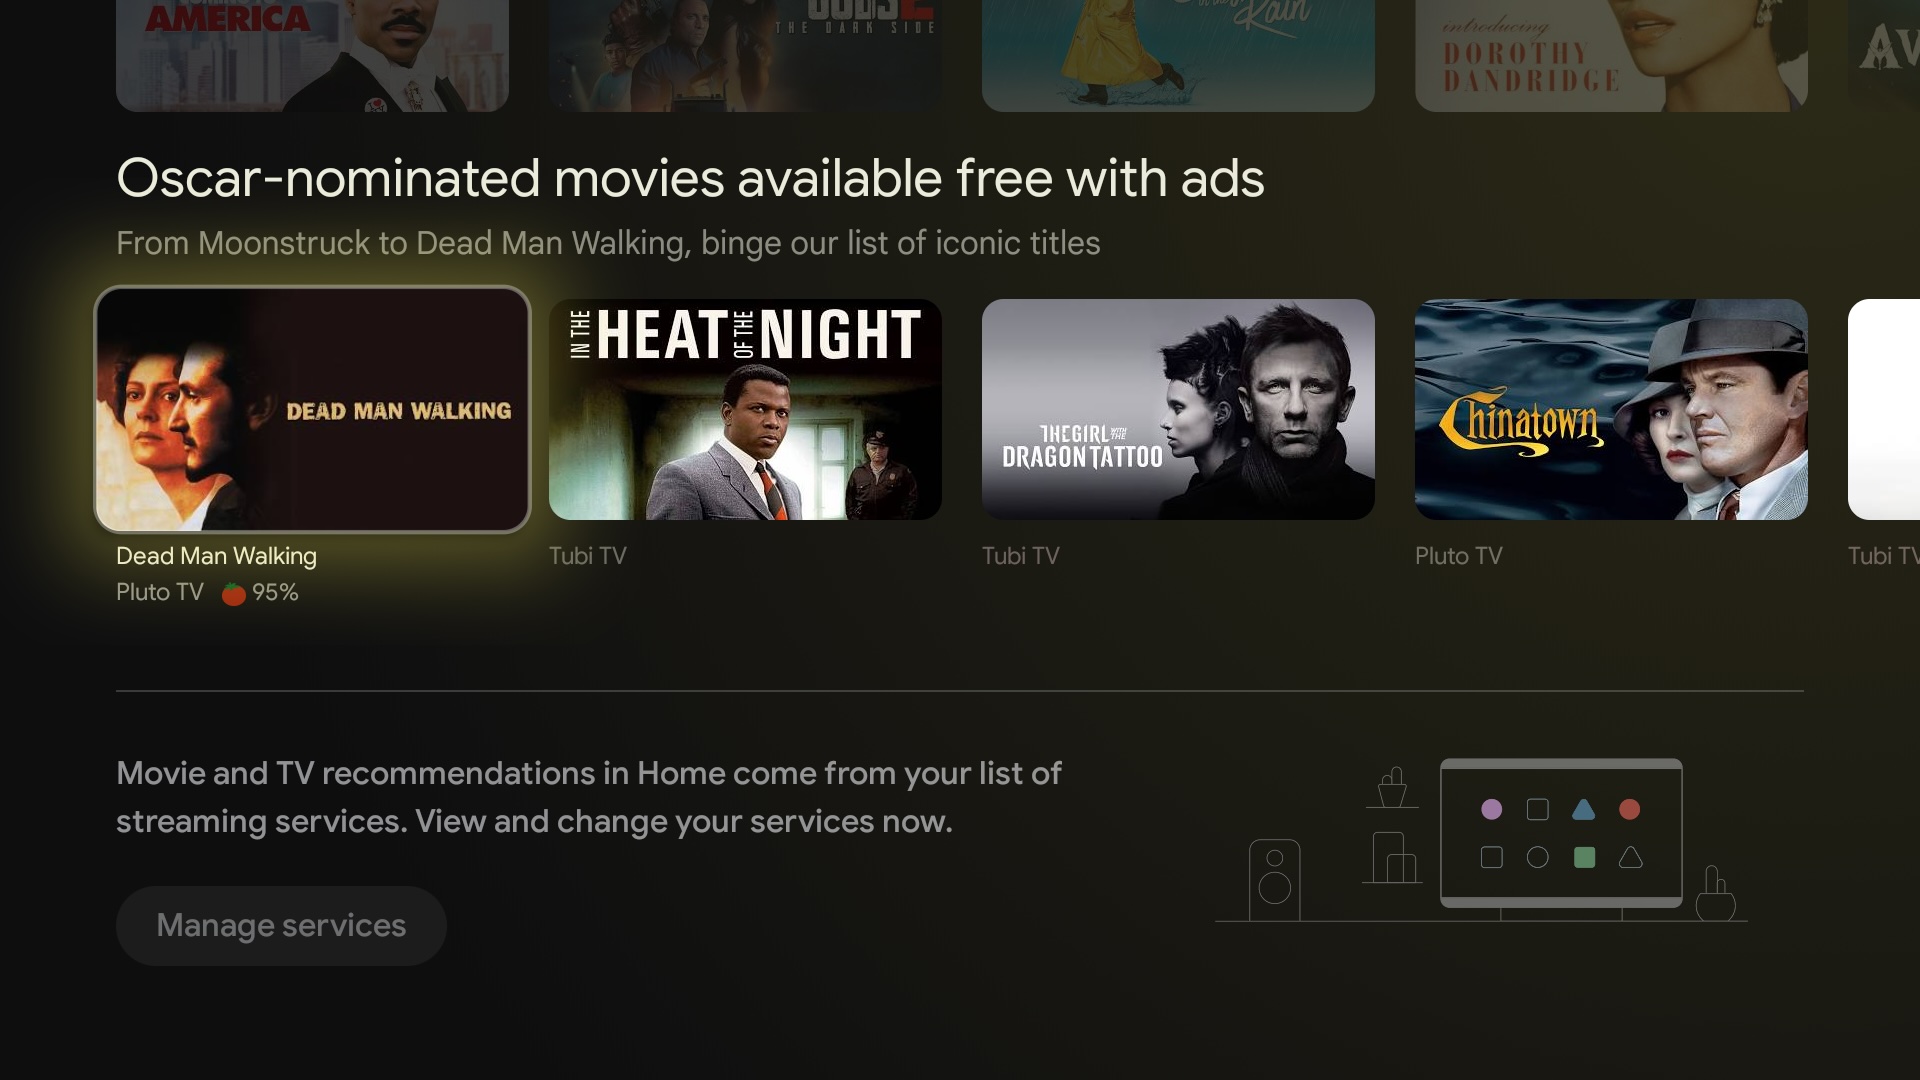 The Google TV screen with Oscar nominee titles you can stream for free